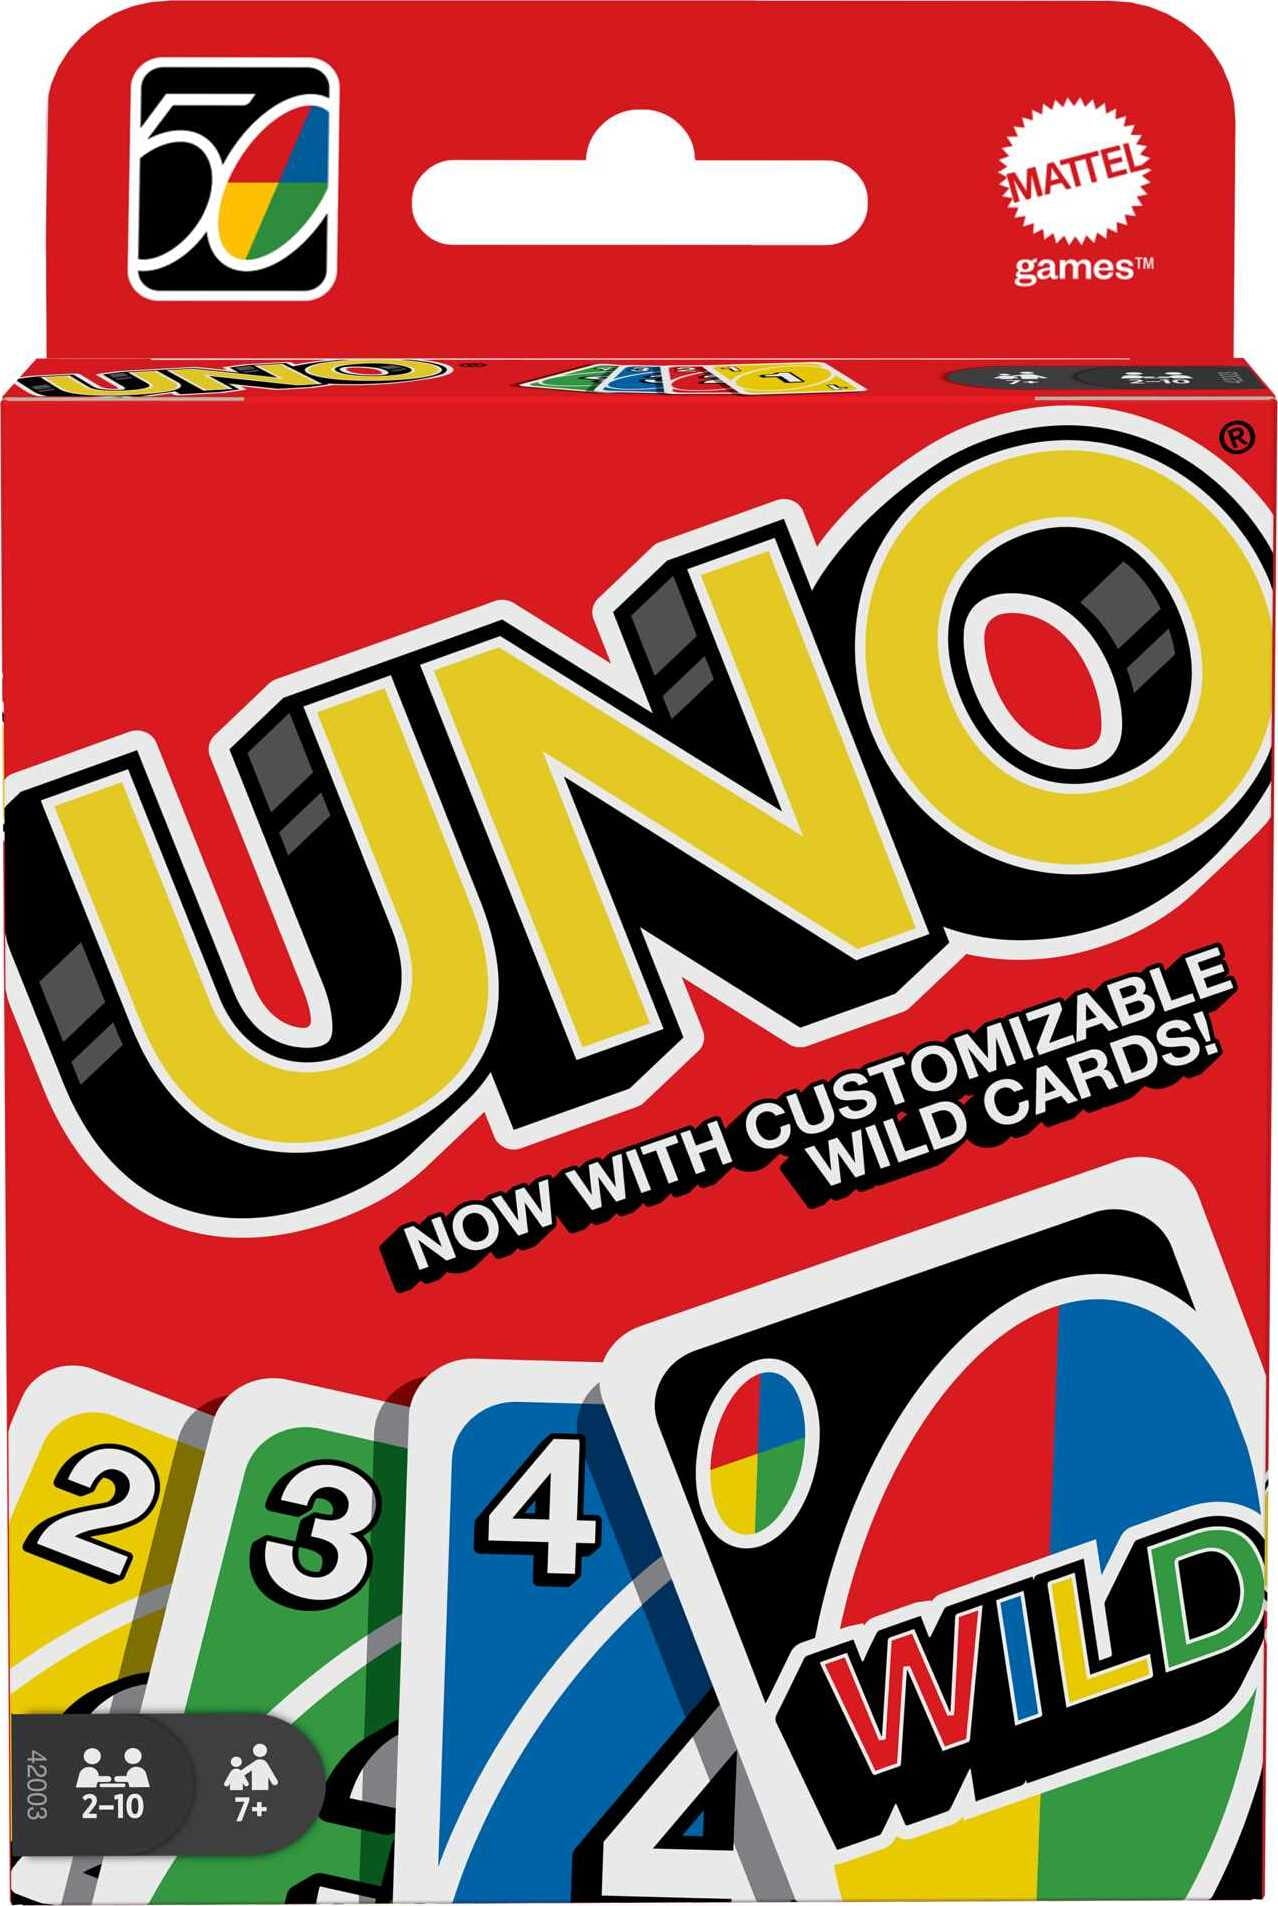 UNO Color & Number Matching Card Game, Customizable Family Fun, 2-10 Players Ages 7+